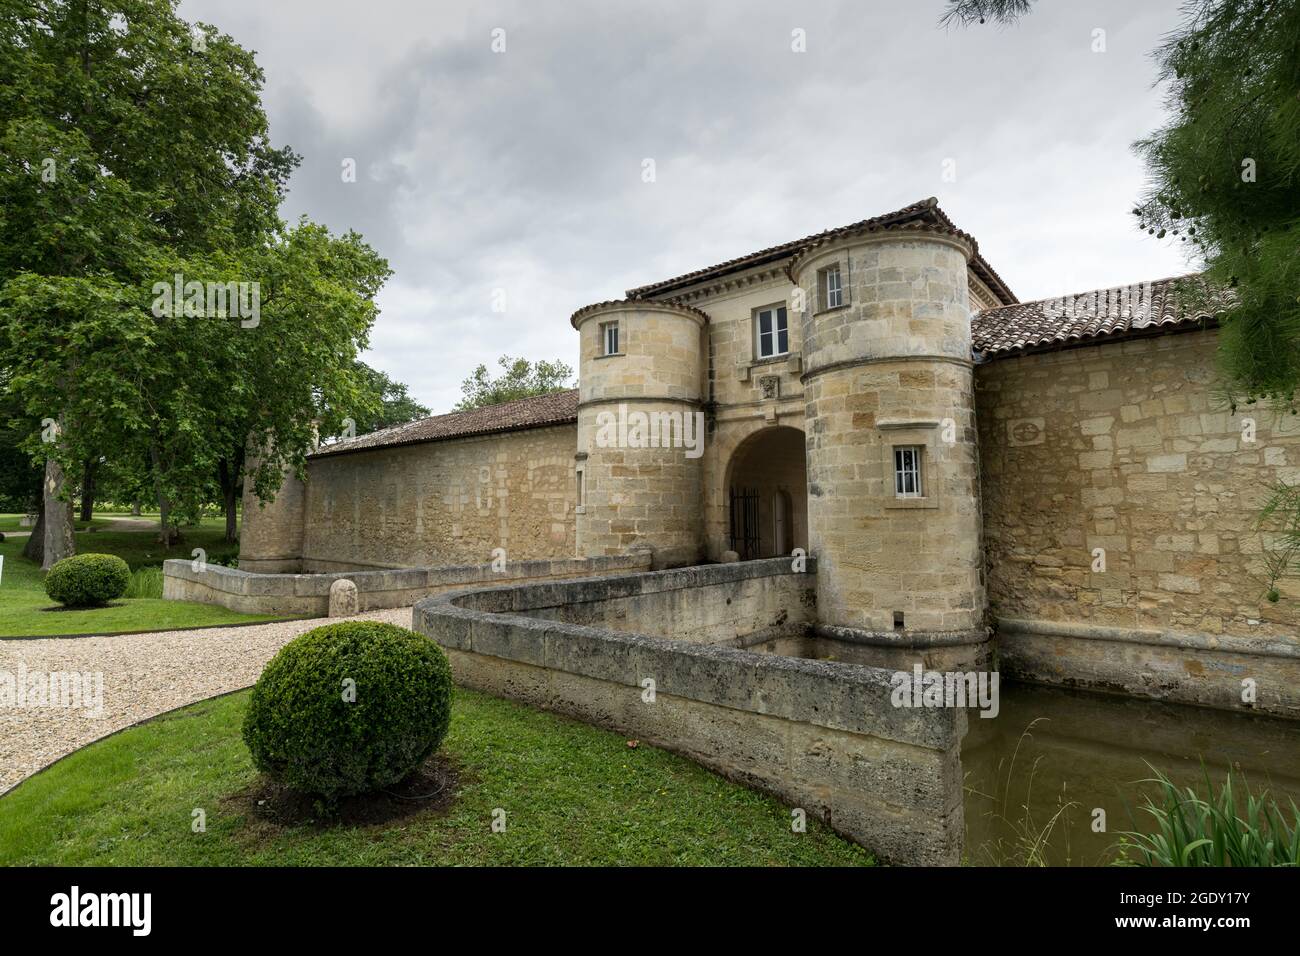 Château d'Issan, in Margaux-Cantenac, situated along the famous Wine Route of Médoc in Gironde, France Stock Photo